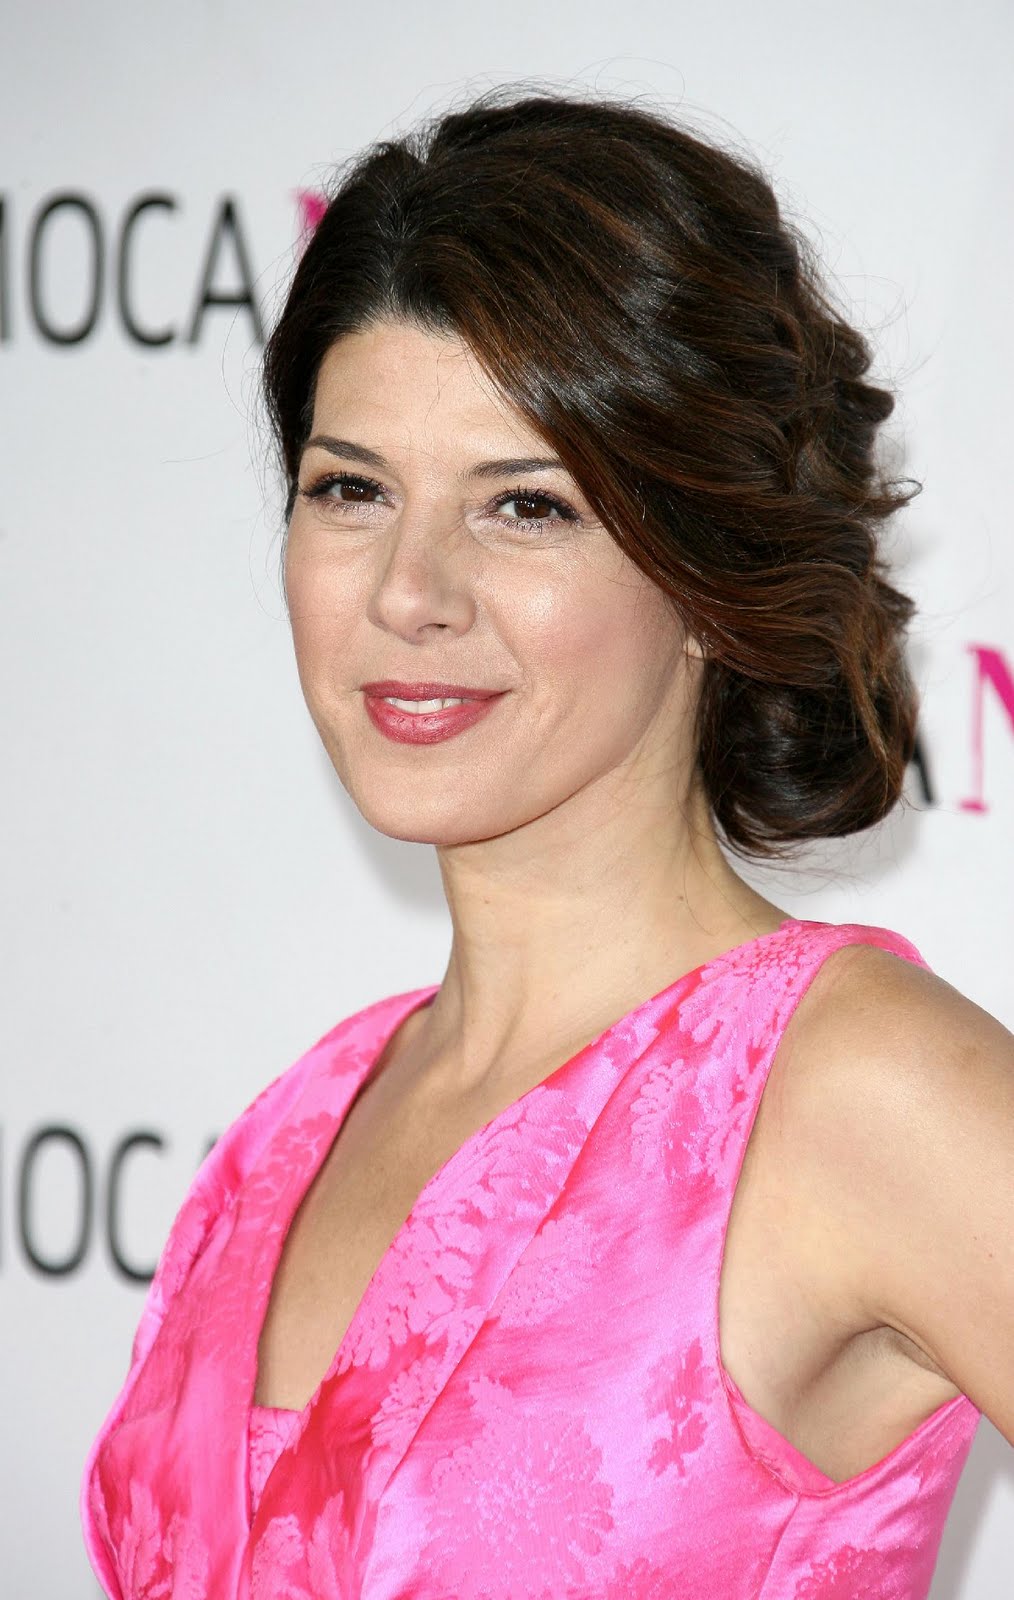 Marisa Tomei Photos, Pictures, Images & Wallpapers | Hollywood Actress